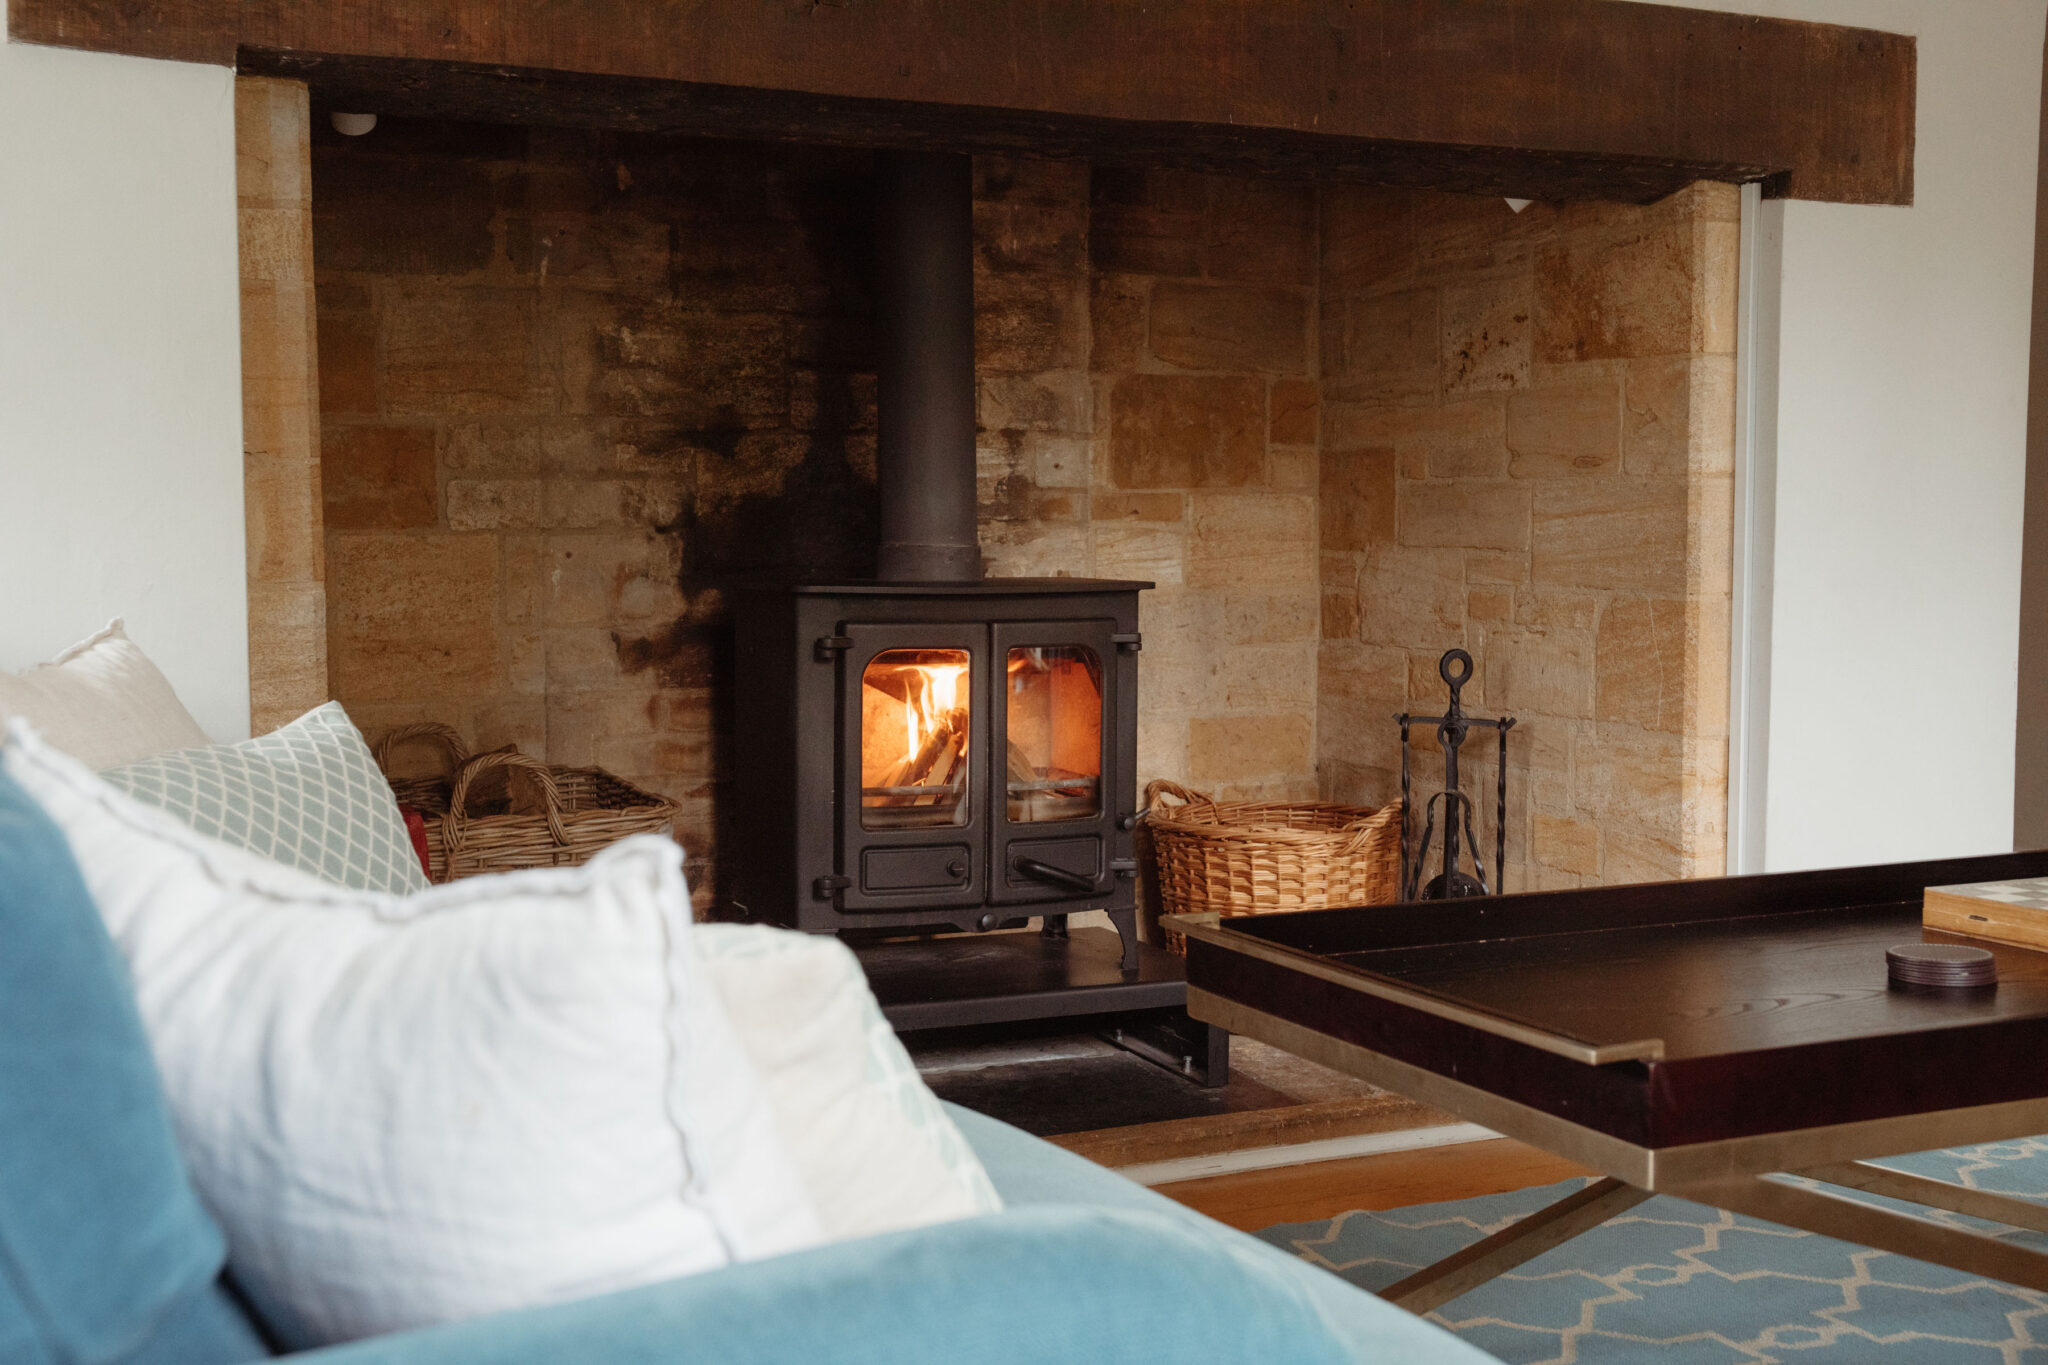 Sitting room with wood burning stove in a large old fireplace